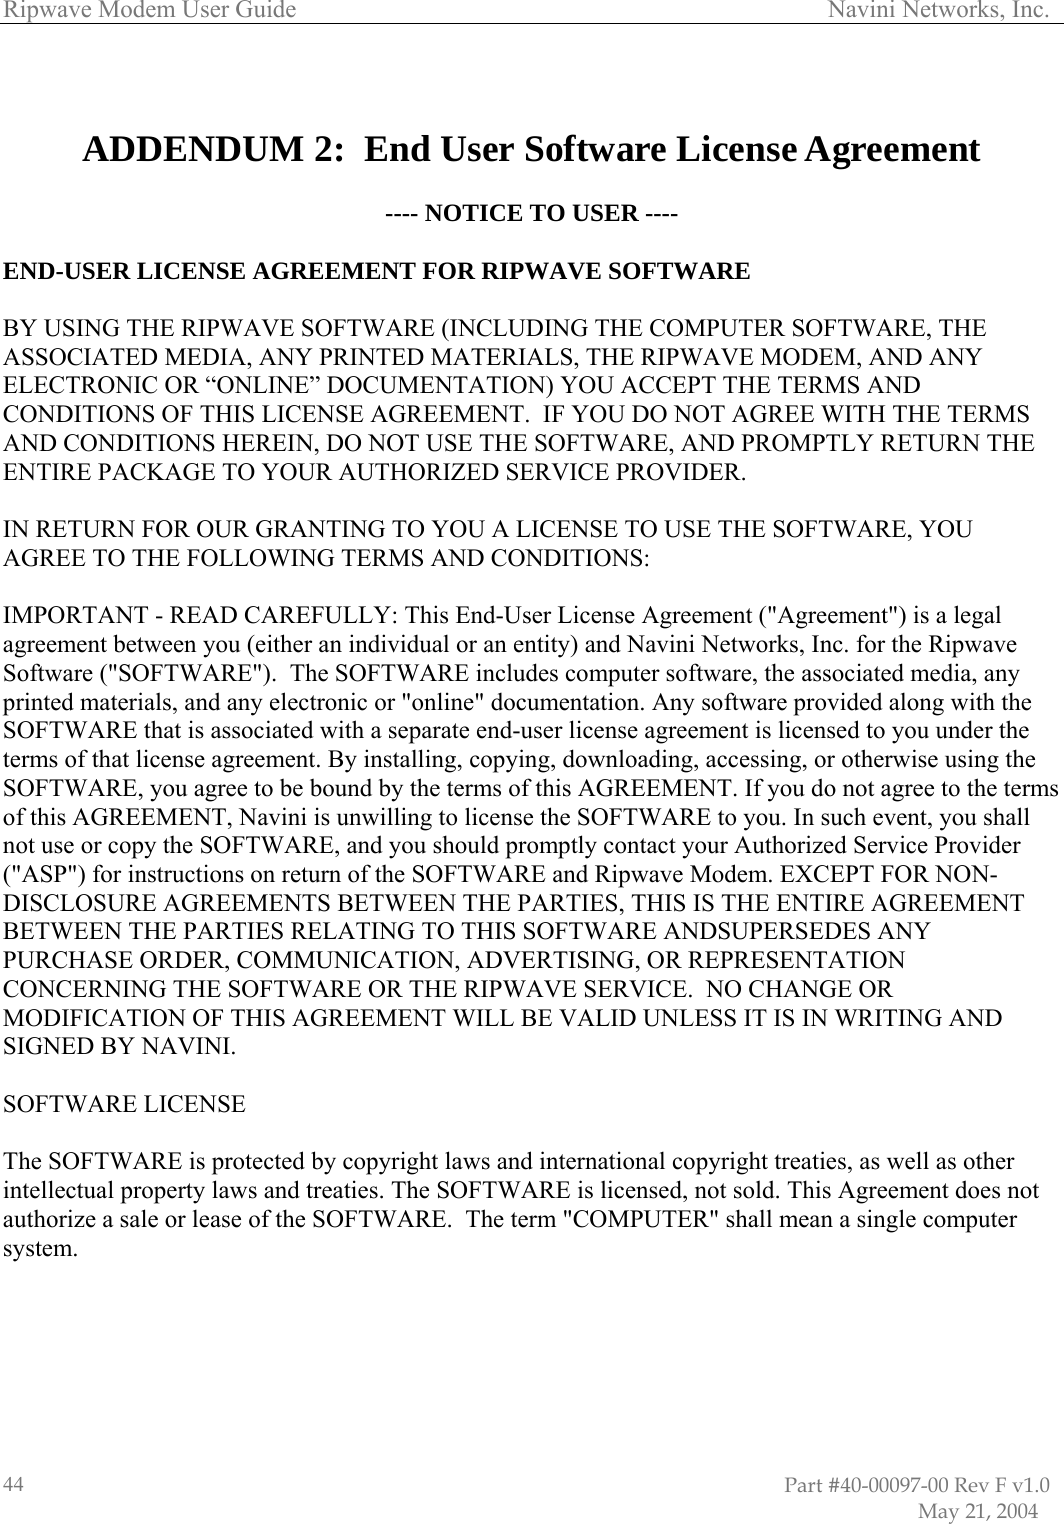 Ripwave Modem User Guide                                                                                     Navini Networks, Inc.   ADDENDUM 2:  End User Software License Agreement   TO USER ---- ND-USER LICENSE AGREEMENT FOR RIPWAVE SOFTWARE ARE, THE HE RIPWAVE MODEM, AND ANY E AGREEMENT.  IF YOU DO NOT AGREE WITH THE TERMS ND CONDITIONS HEREIN, DO NOT USE THE SOFTWARE, AND PROMPTLY RETURN THE AUTHORIZED SERVICE PROVIDER. SE TO USE THE SOFTWARE, YOU TERMS AND CONDITIONS: LLY: This End-User License Agreement (&quot;Agreement&quot;) is a legal  individual or an entity) and Navini Networks, Inc. for the Ripwave oftware (&quot;SOFTWARE&quot;).  The SOFTWARE includes computer software, the associated media, any printed materials, and any electronic or &quot;online&quot; documentation. Any software provided along with the SOFTWARE that is associated with a separate end-user license agreement is licensed to you under the terms of that license agreement. By installing, copying, downloading, accessing, or otherwise using the SOFTWARE, you agree to be bound by the terms of this AGREEMENT. If you do not agree to the terms of this AGREEMENT, Navini is unwilling to license the SOFTWARE to you. In such event, you shall not use or copy the SOFTWARE, and you should promptly contact your Authorized Service Provider (&quot;ASP&quot;) for instructions on return of the SOFTWARE and Ripwave Modem. EXCEPT FOR NON-DISCLOSURE AGREEMENTS BETWEEN THE PARTIES, THIS IS THE ENTIRE AGREEMENT BETWEEN THE PARTIES RELATING TO THIS SOFTWARE ANDSUPERSEDES ANY PURCHASE ORDER, COMMUNICATION, ADVERTISING, OR REPRESENTATION CONCERNING THE SOFTWARE OR THE RIPWAVE SERVICE.  NO CHANGE OR MODIFICATION OF THIS AGREEMENT WILL BE VALID UNLESS IT IS IN WRITING AND SIGNED BY NAVINI.  SOFTWARE LICENSE  The SOFTWARE is protected by copyright laws and international copyright treaties, as well as other intellectual property laws and treaties. The SOFTWARE is licensed, not sold. This Agreement does not authorize a sale or lease of the SOFTWARE.  The term &quot;COMPUTER&quot; shall mean a single computer system.   ---- NOTICE E BY USING THE RIPWAVE SOFTWARE (INCLUDING THE COMPUTER SOFTWSSOCIATED MEDIA, ANY PRINTED MATERIALS, TAELECTRONIC OR “ONLINE” DOCUMENTATION) YOU ACCEPT THE TERMS AND CONDITIONS OF THIS LICENSAENTIRE PACKAGE TO YOUR   YOU A LICENIN RETURN FOR OUR GRANTING TOAGREE TO THE FOLLOWING  IMPORTANT - READ CAREFUgreement between you (either anaS                                                                                                                        Part #40-00097-00 Rev F v1.0                           May 21, 2004 44